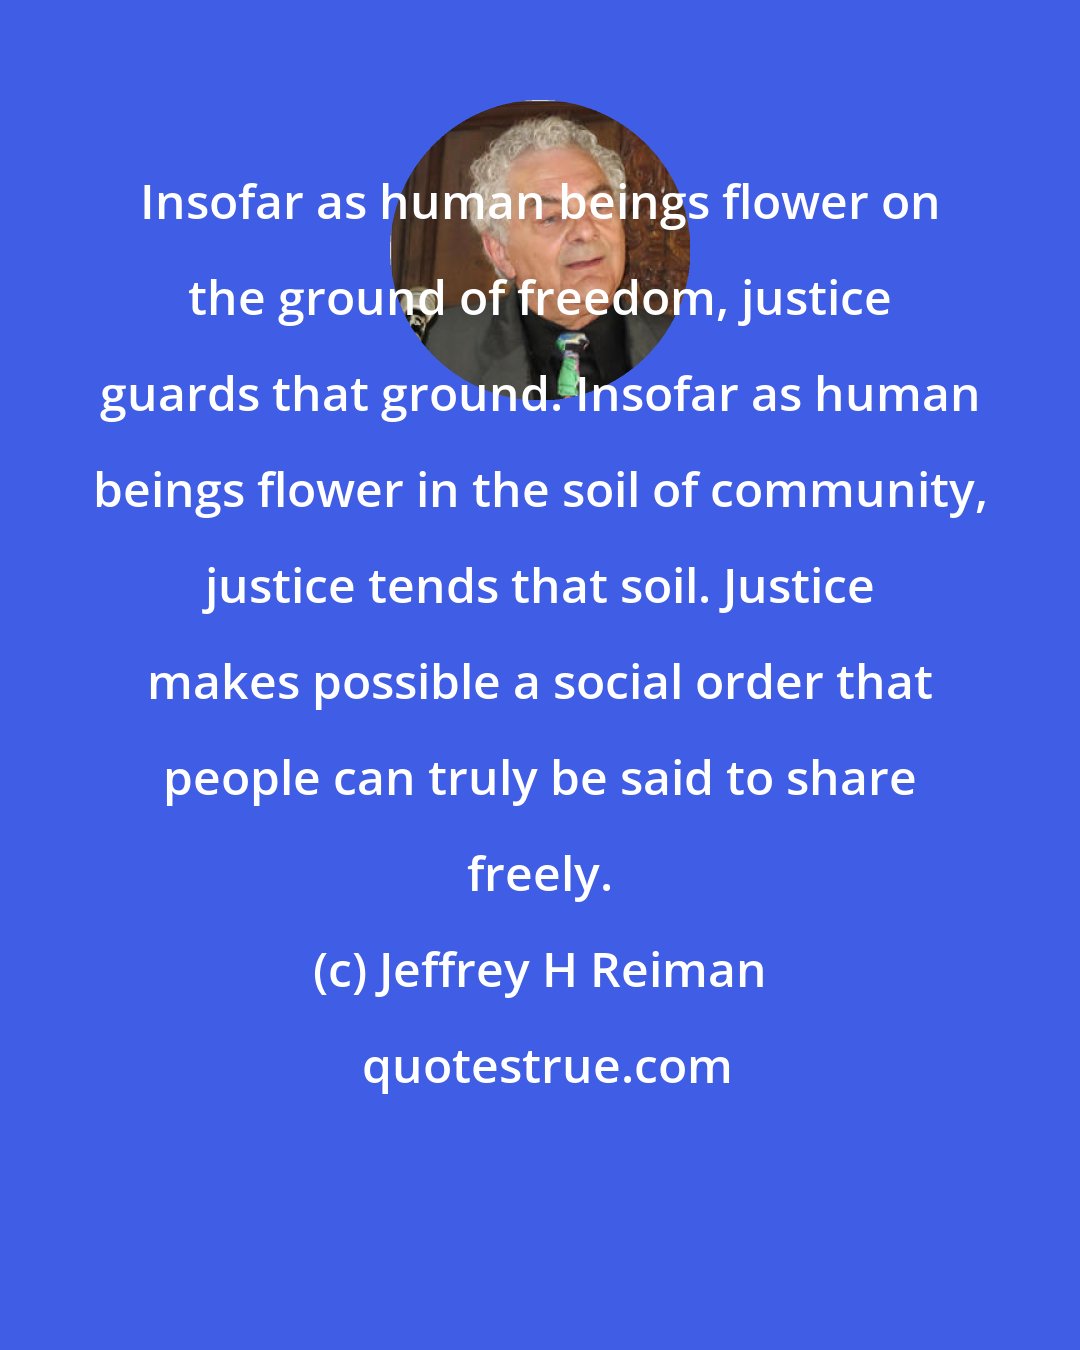 Jeffrey H Reiman: Insofar as human beings flower on the ground of freedom, justice guards that ground. Insofar as human beings flower in the soil of community, justice tends that soil. Justice makes possible a social order that people can truly be said to share freely.